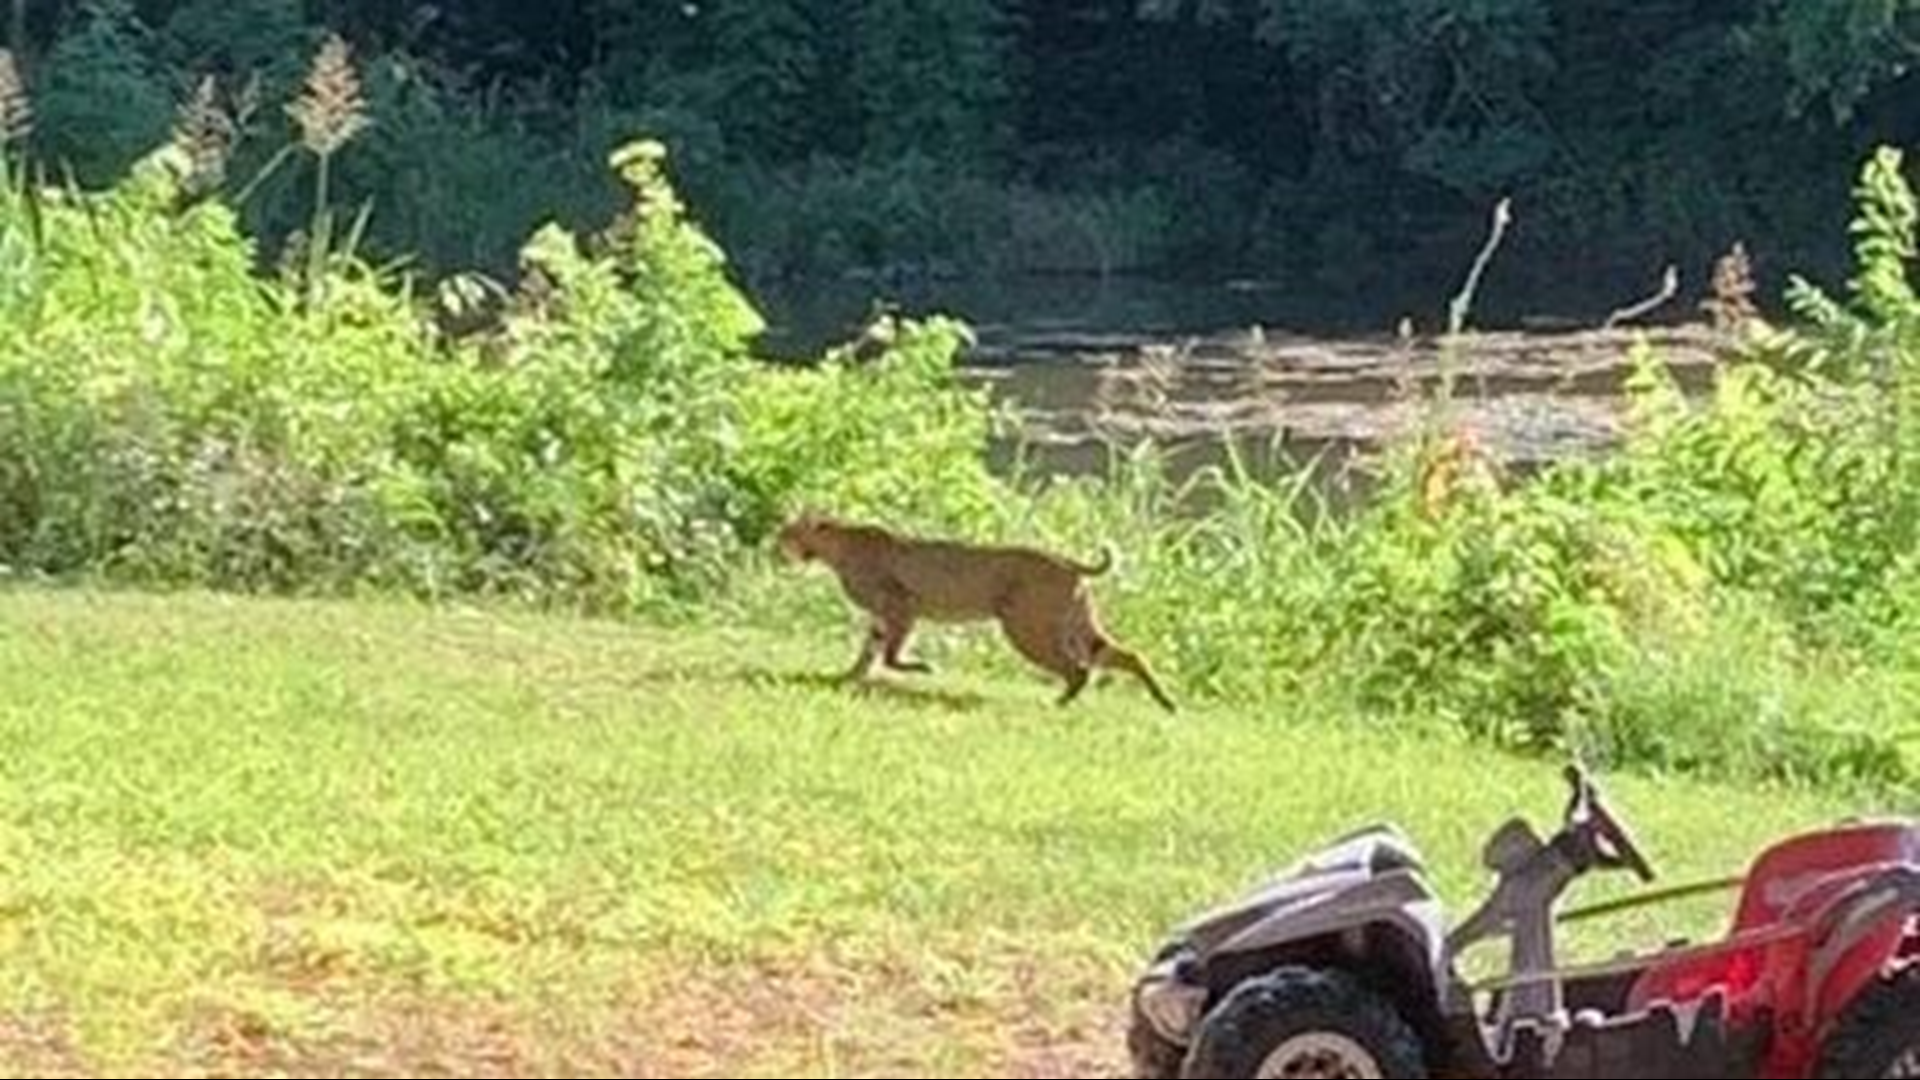 A Round Rock neighborhood is keeping an eye out for wild animals after a bobcat was seen roaming around their homes.